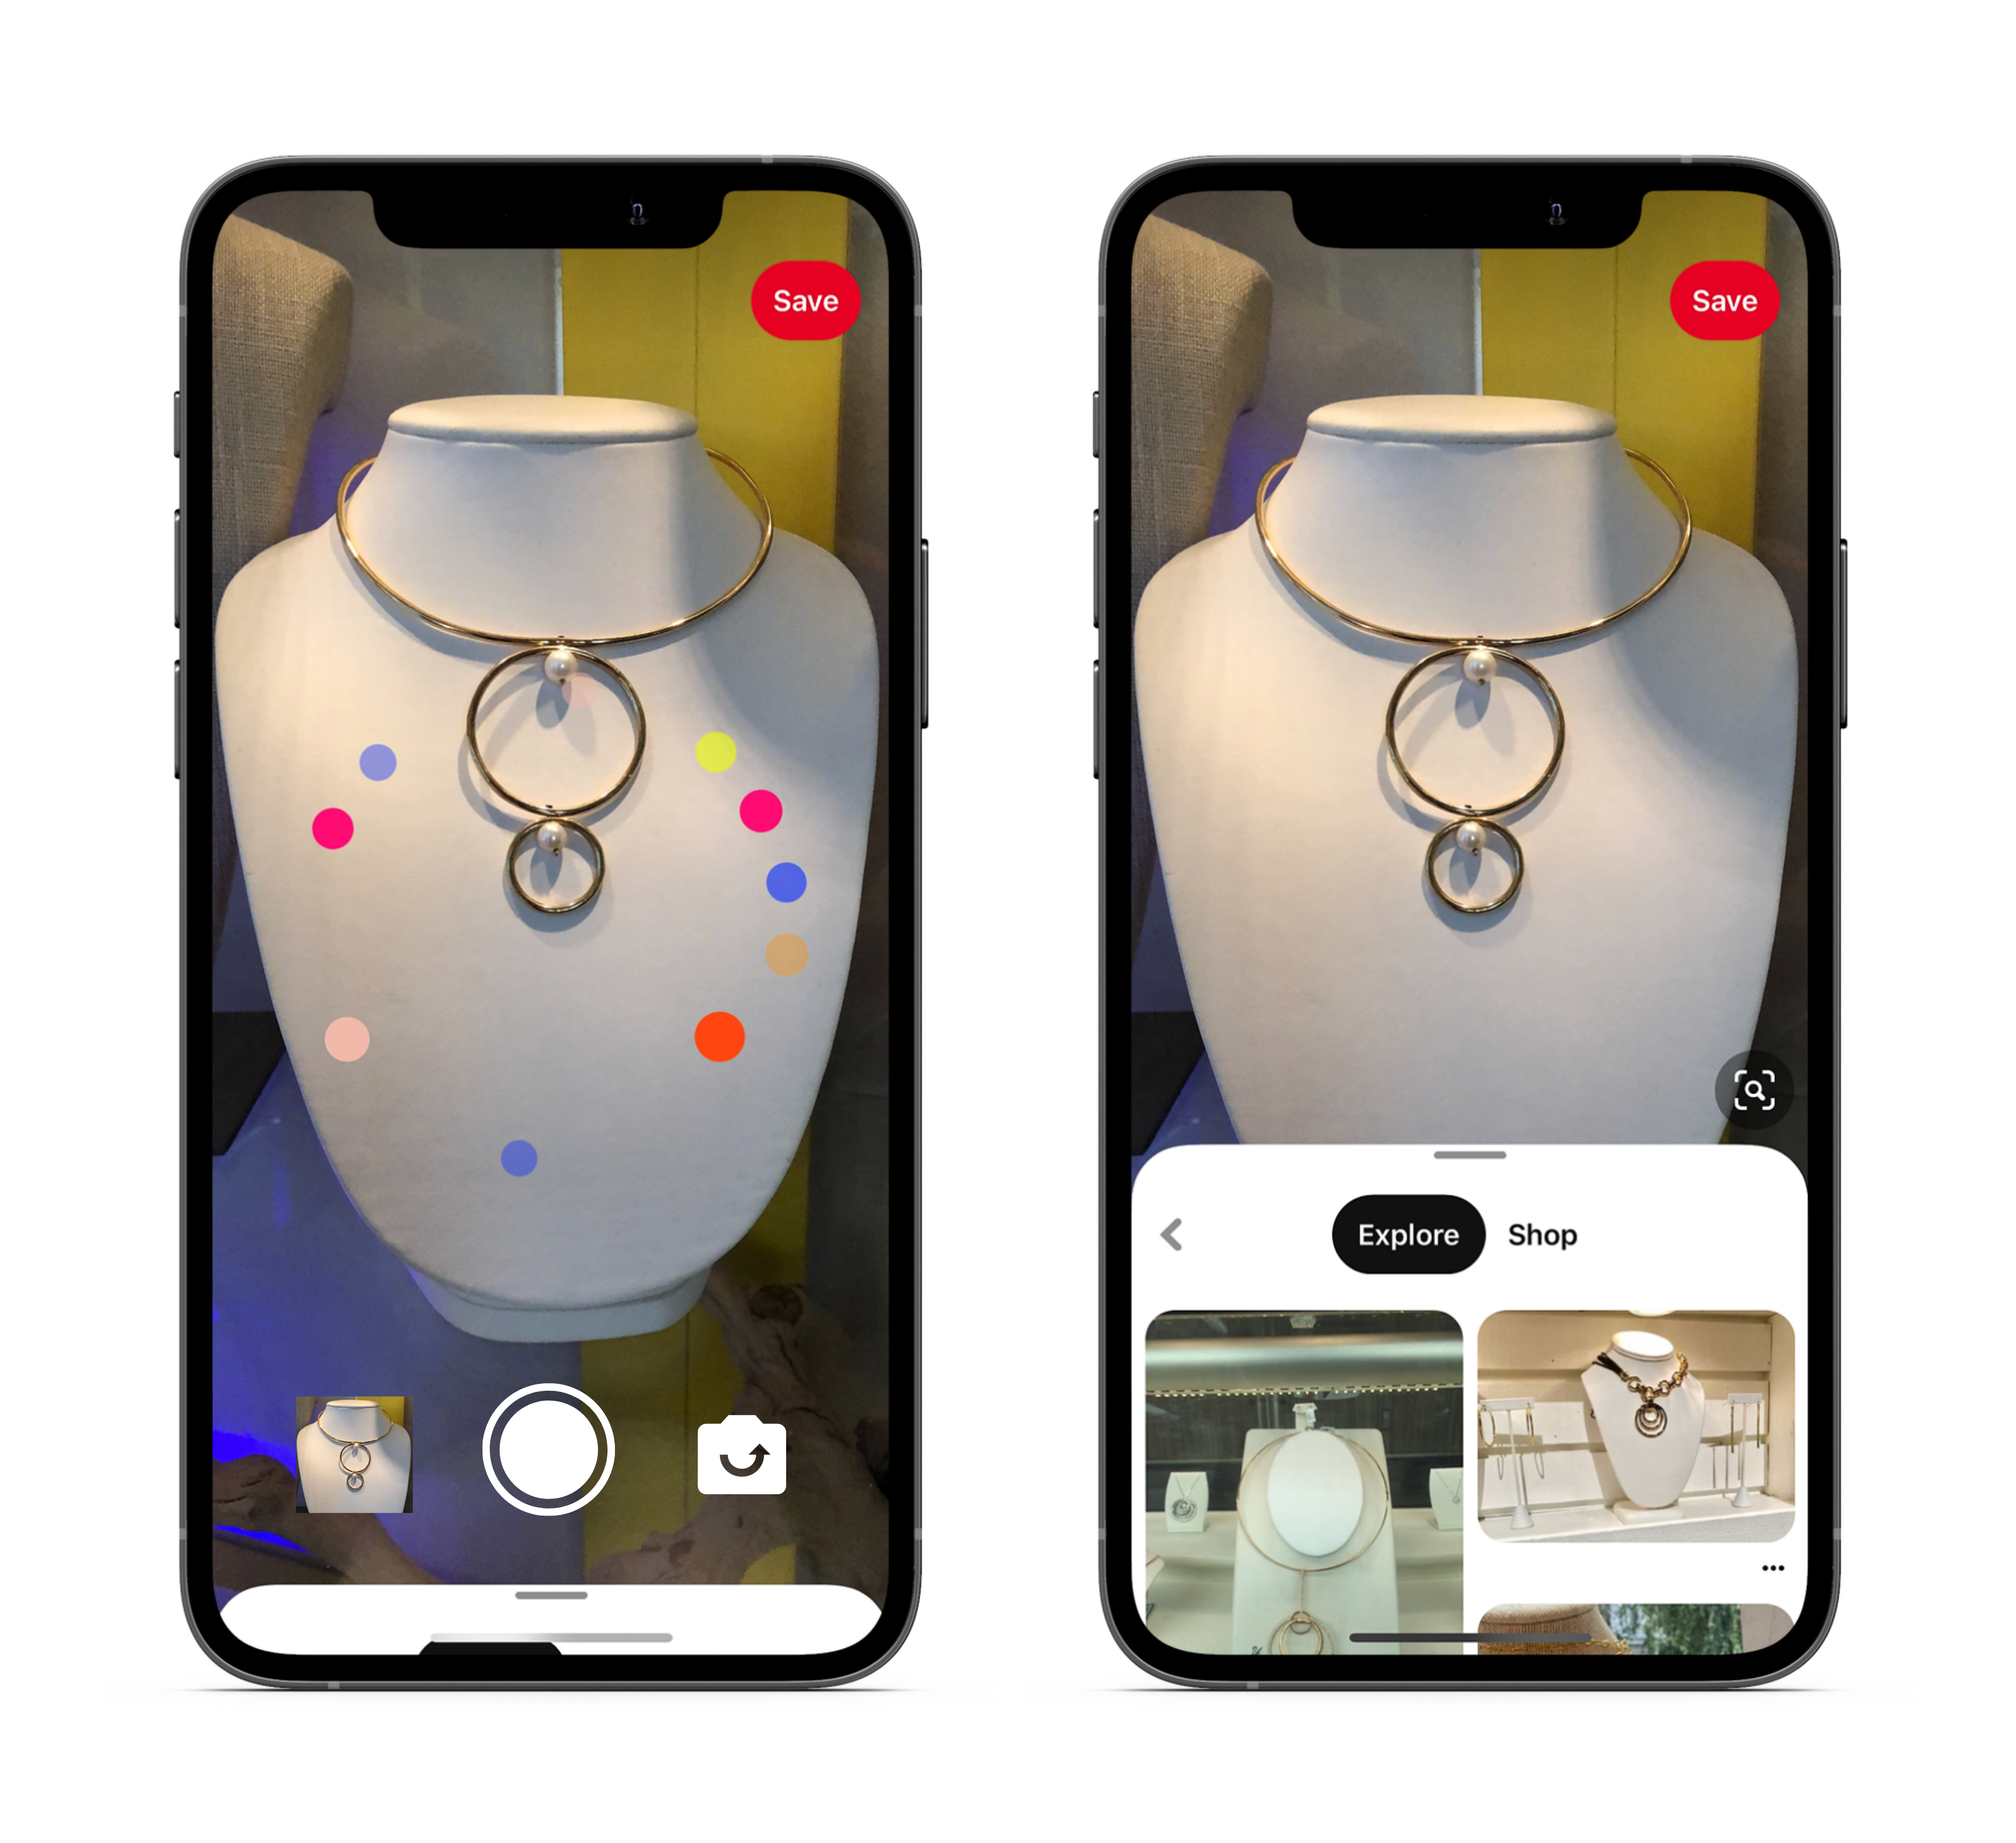 Screenshot of Iphone showing shop with lens feature on Pinterest